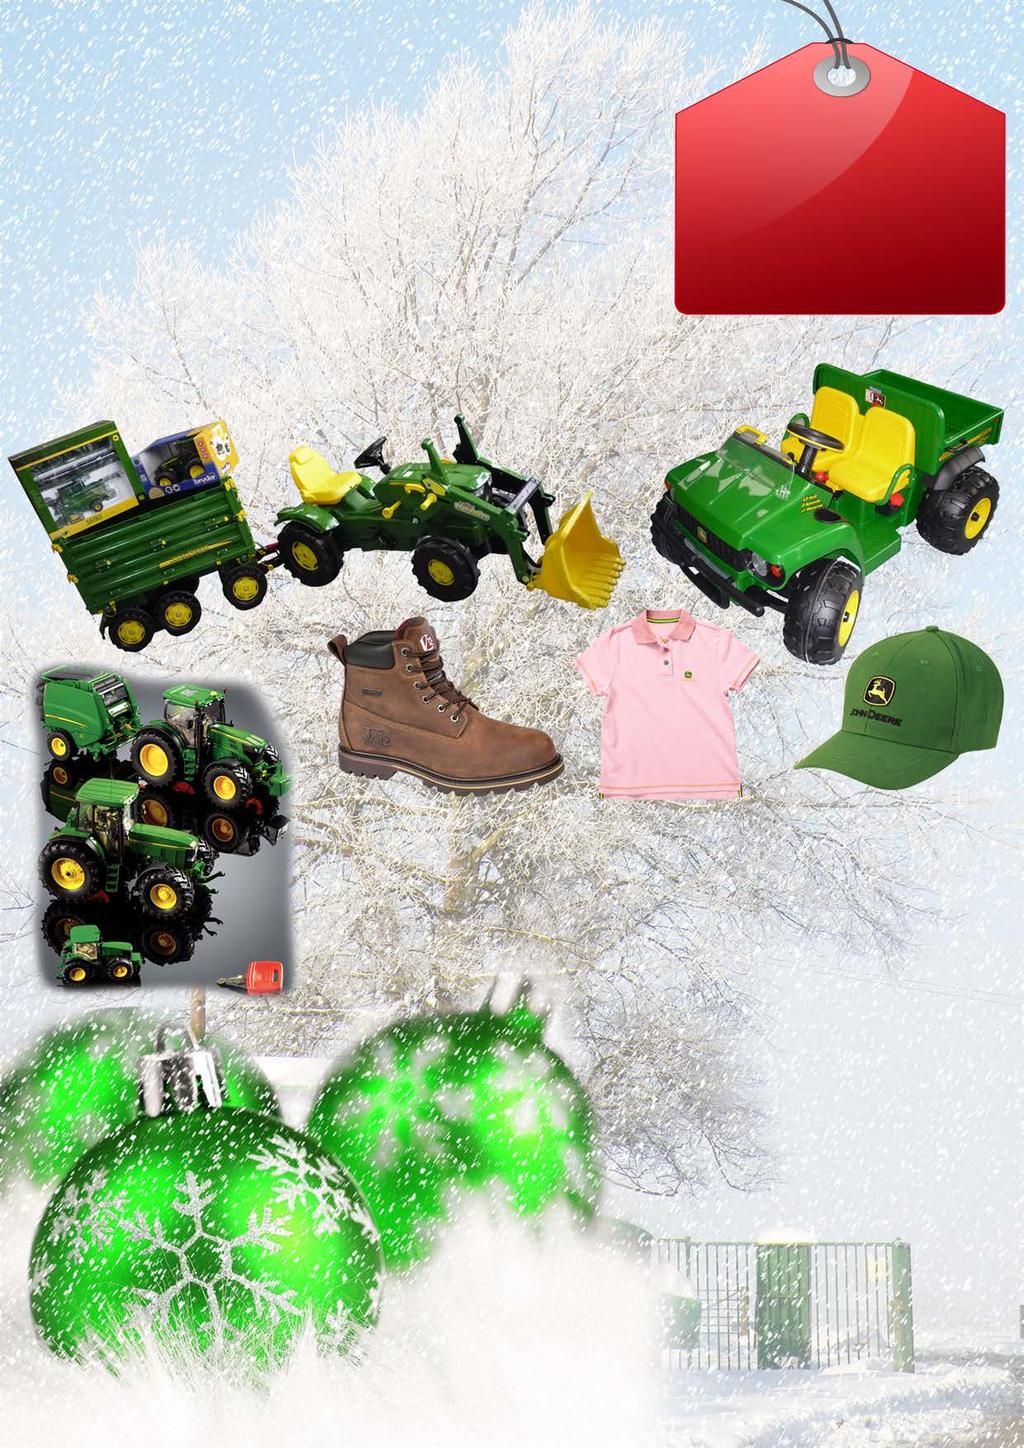 Gift ideas for the family from RBM this Christmas Ride on Toys Assembled for